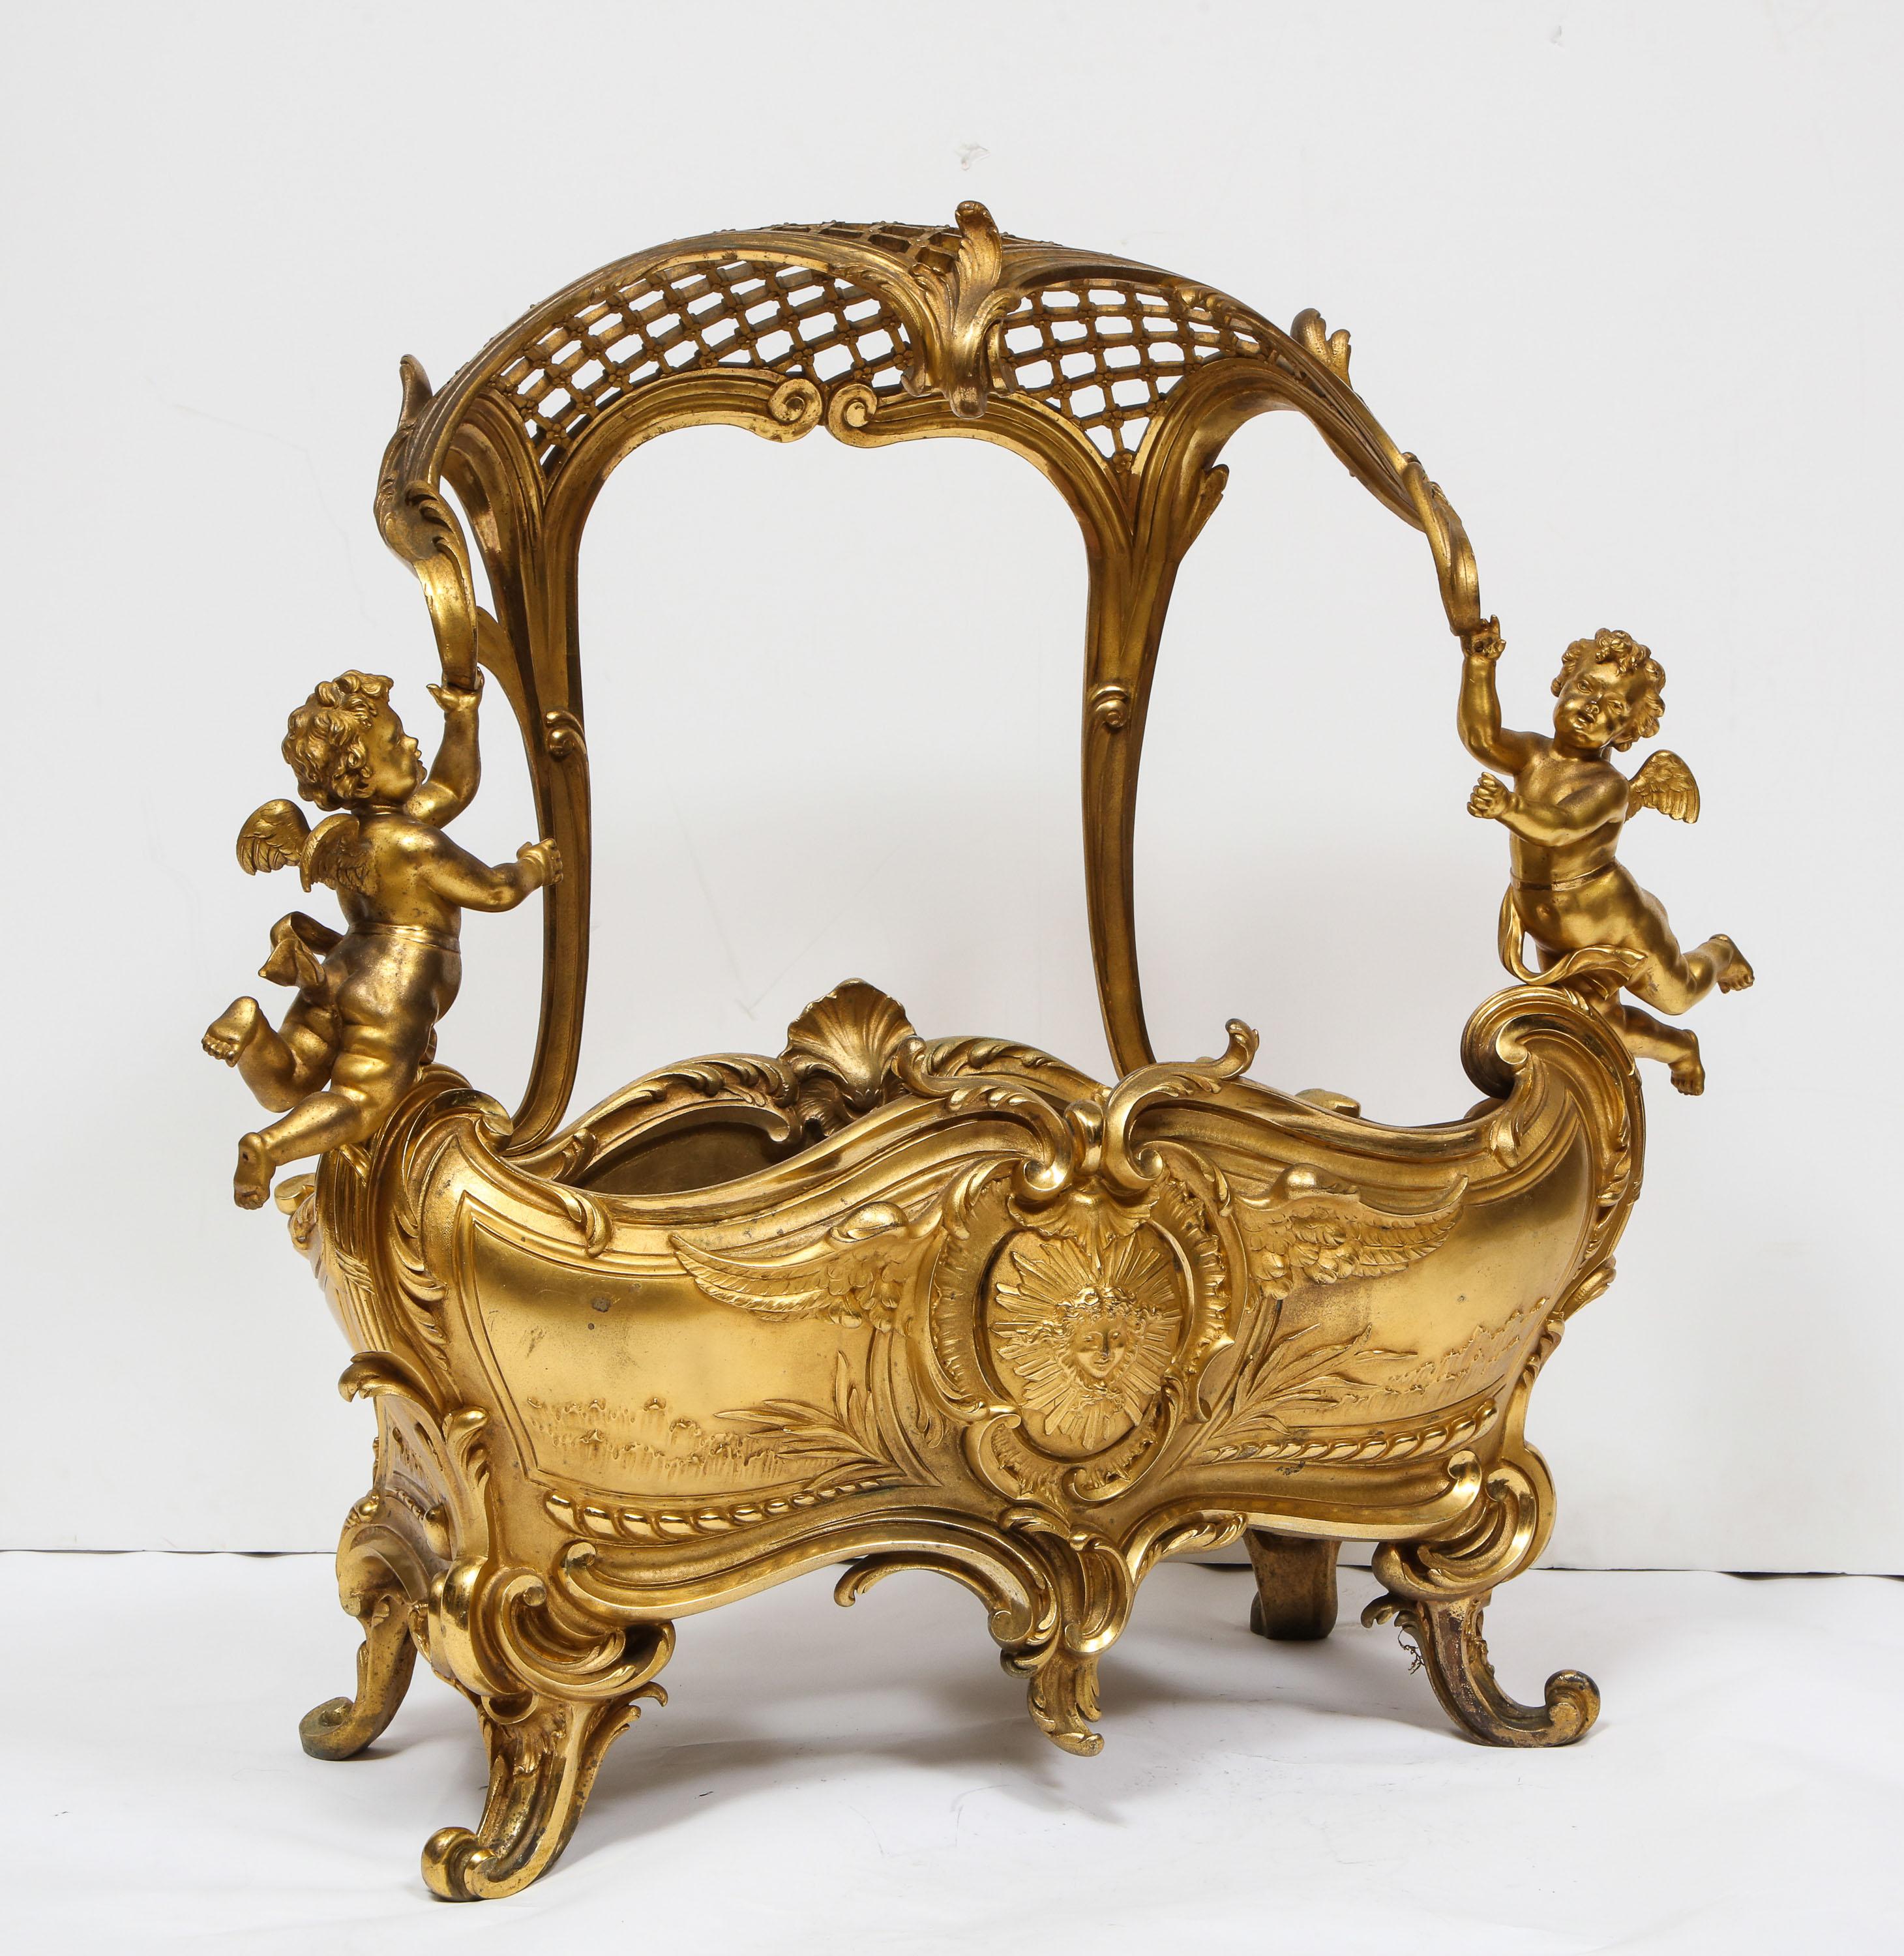 Exceptional Napoleon III French ormolu fireplace log cradle holder, centerpiece, circa 1870, in the manner of Francois Linke, Paris.

Very unusual 19th century gilt bronze fireplace pit. Can be used as a wood holder cradle, or can even be used as